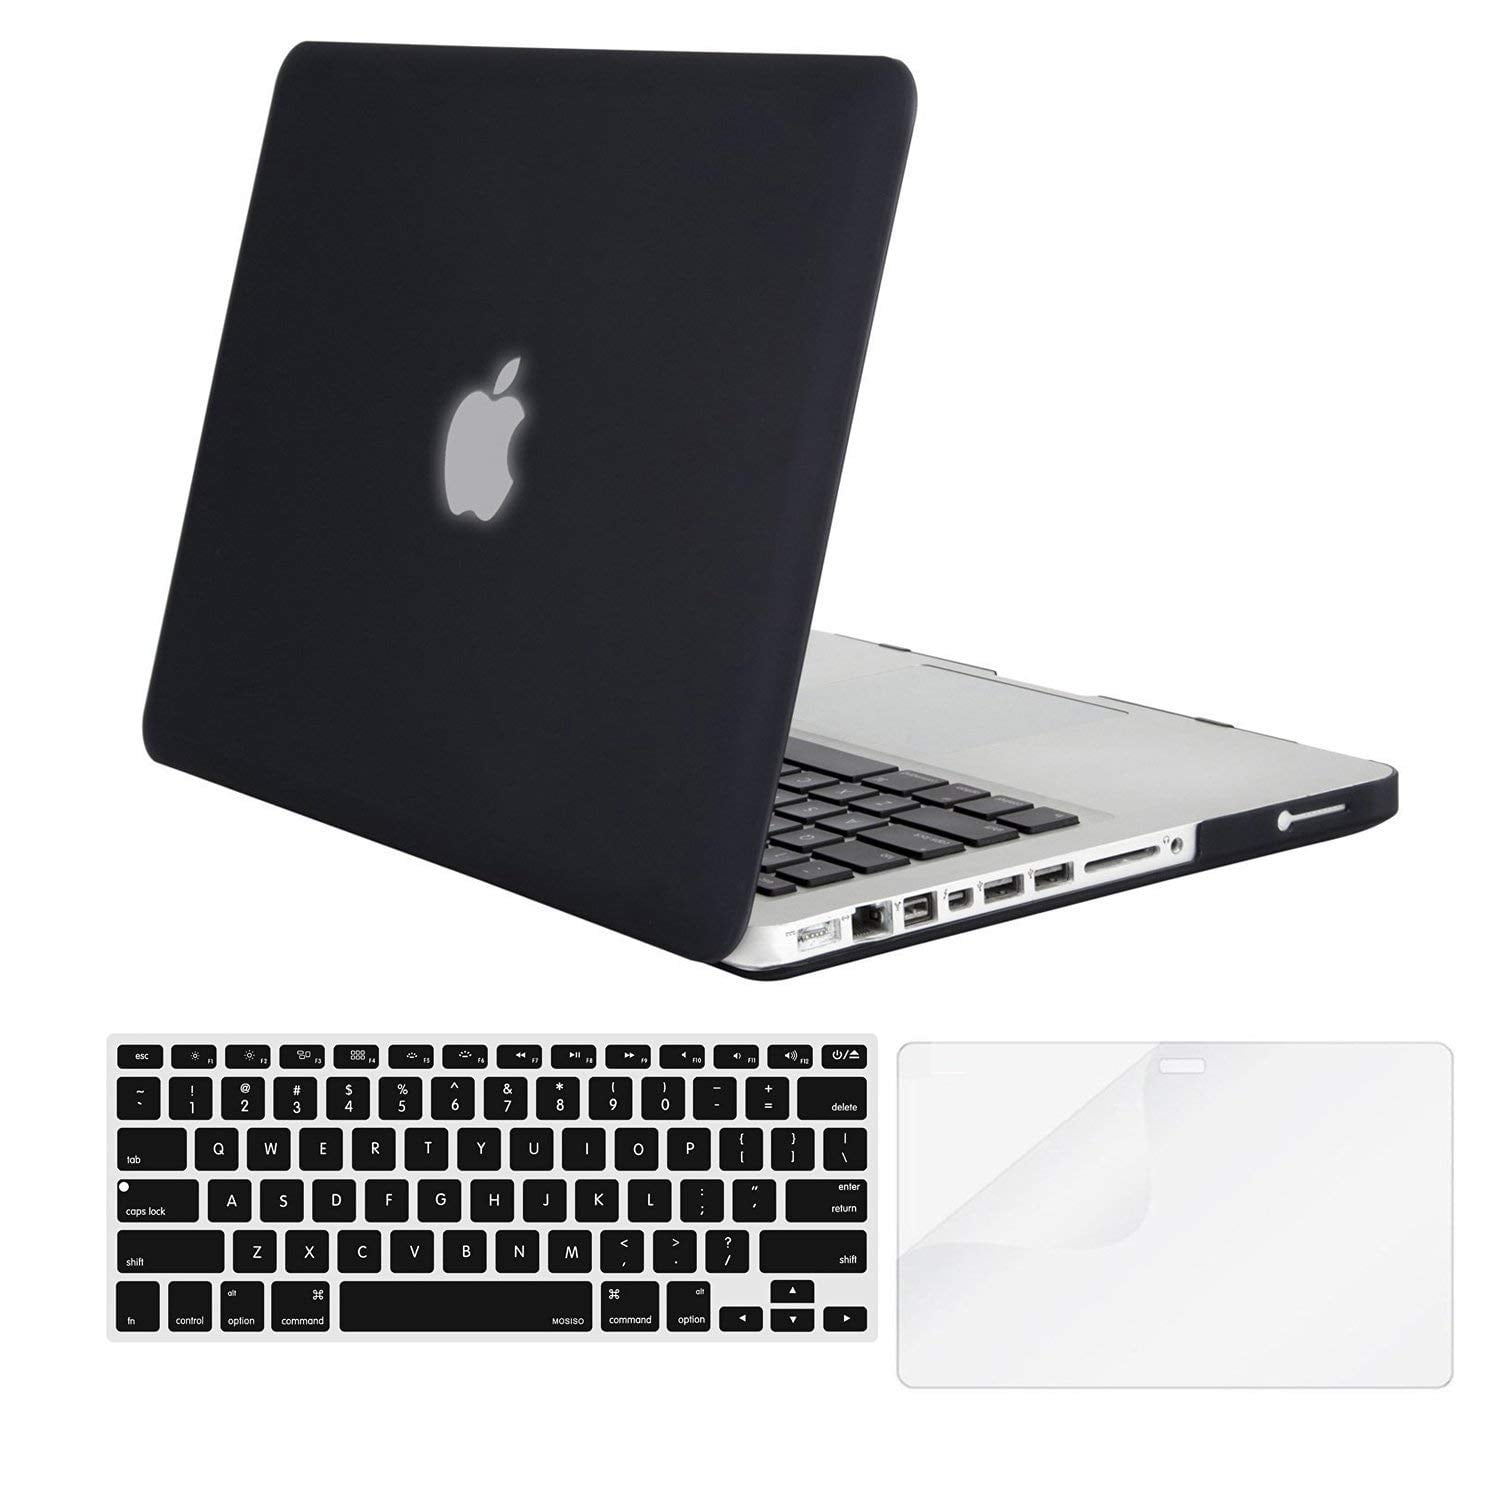 w/Keyboard Cover Plastic Hard Shell Cover A1278 2 in 1 Bundle CD Drive Fantasy KECC Laptop Case for Old MacBook Pro 13 